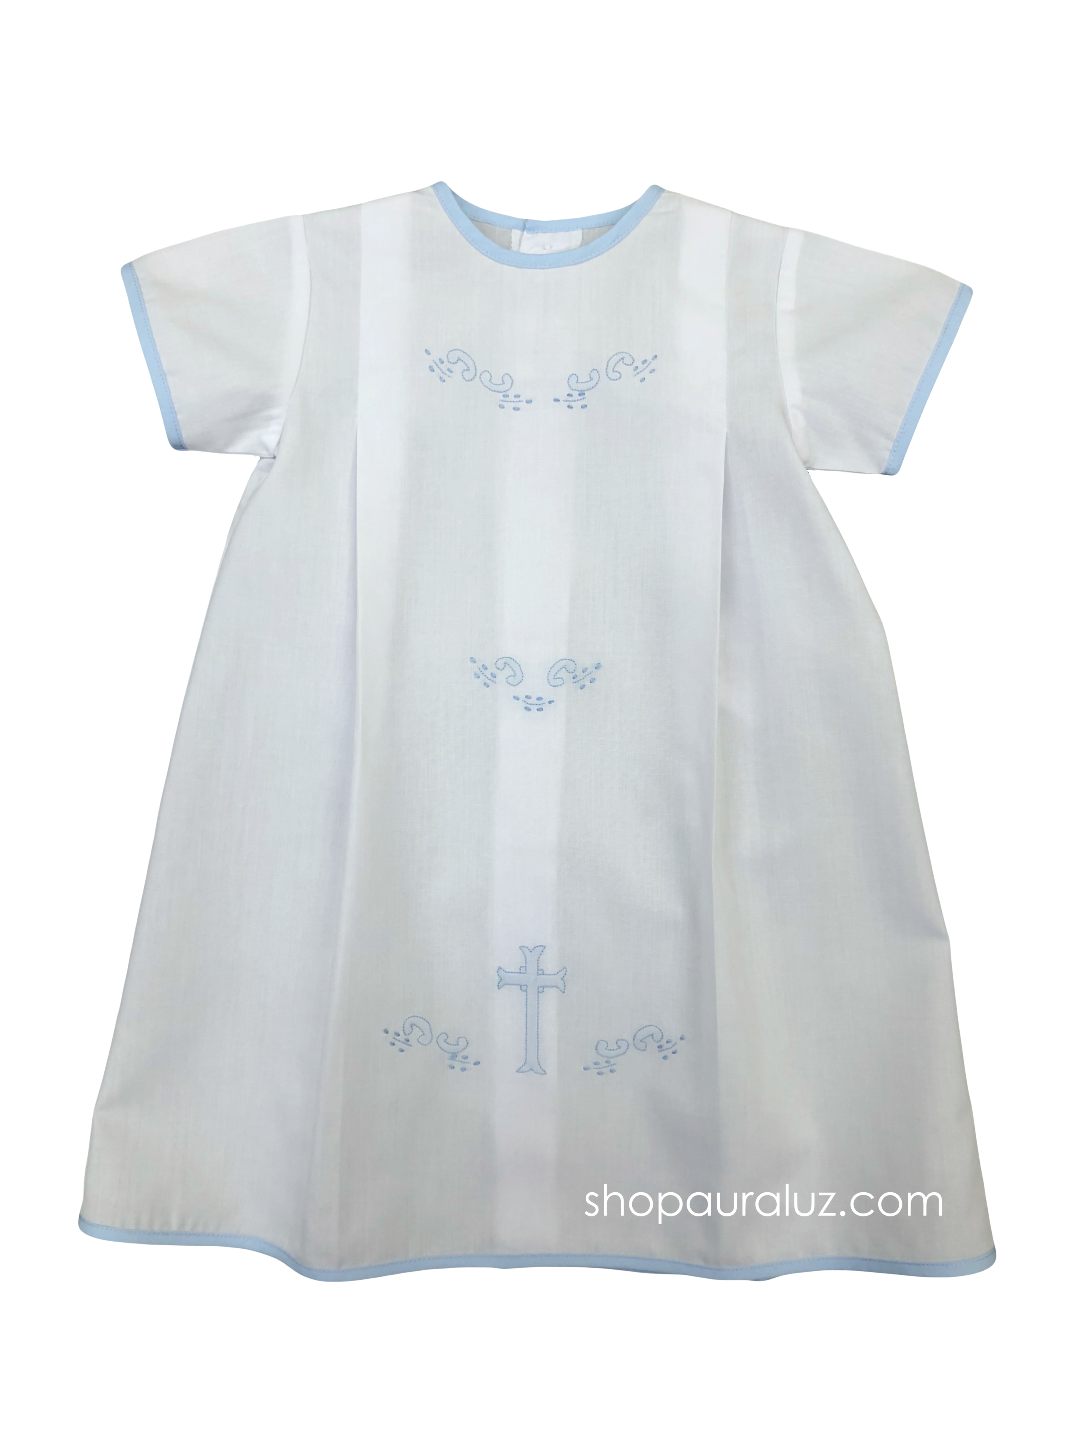 Auraluz Day Gown...White with blue binding trim and embroidered cross